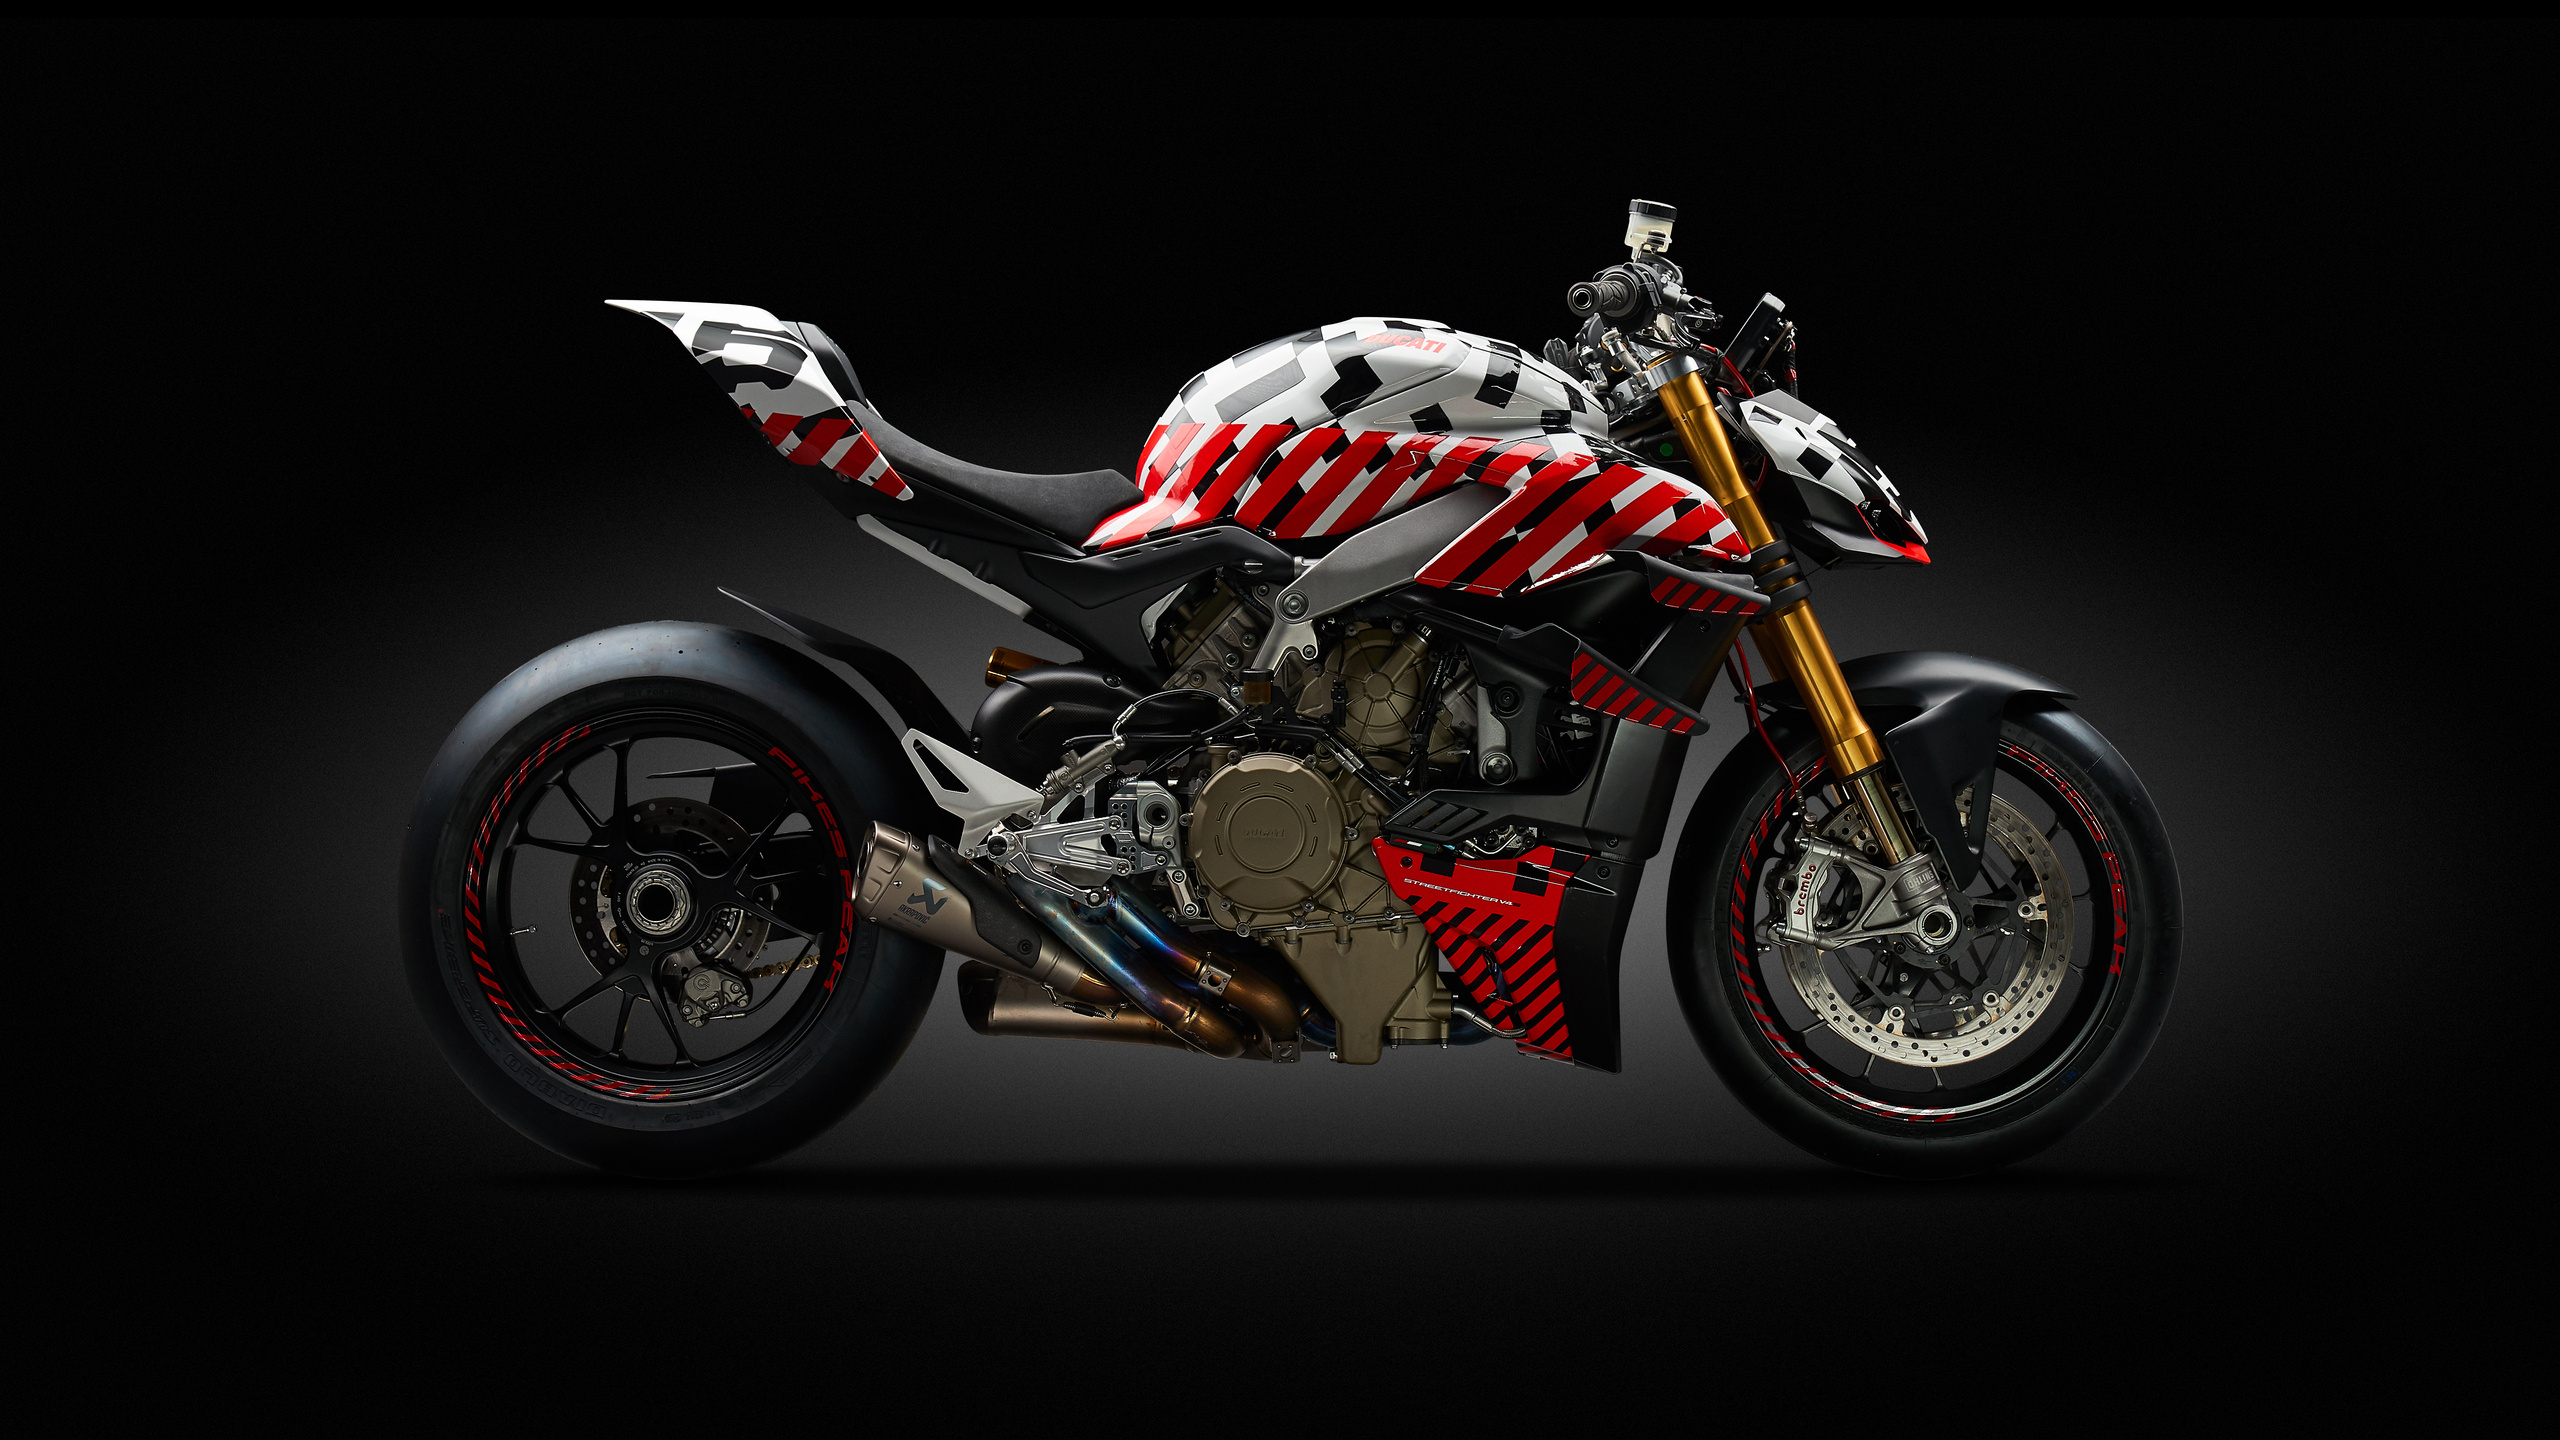 Ducati Streetfighter, Panigale V4 aggression, High-resolution wallpapers, Motorcycle photography, 2560x1440 HD Desktop